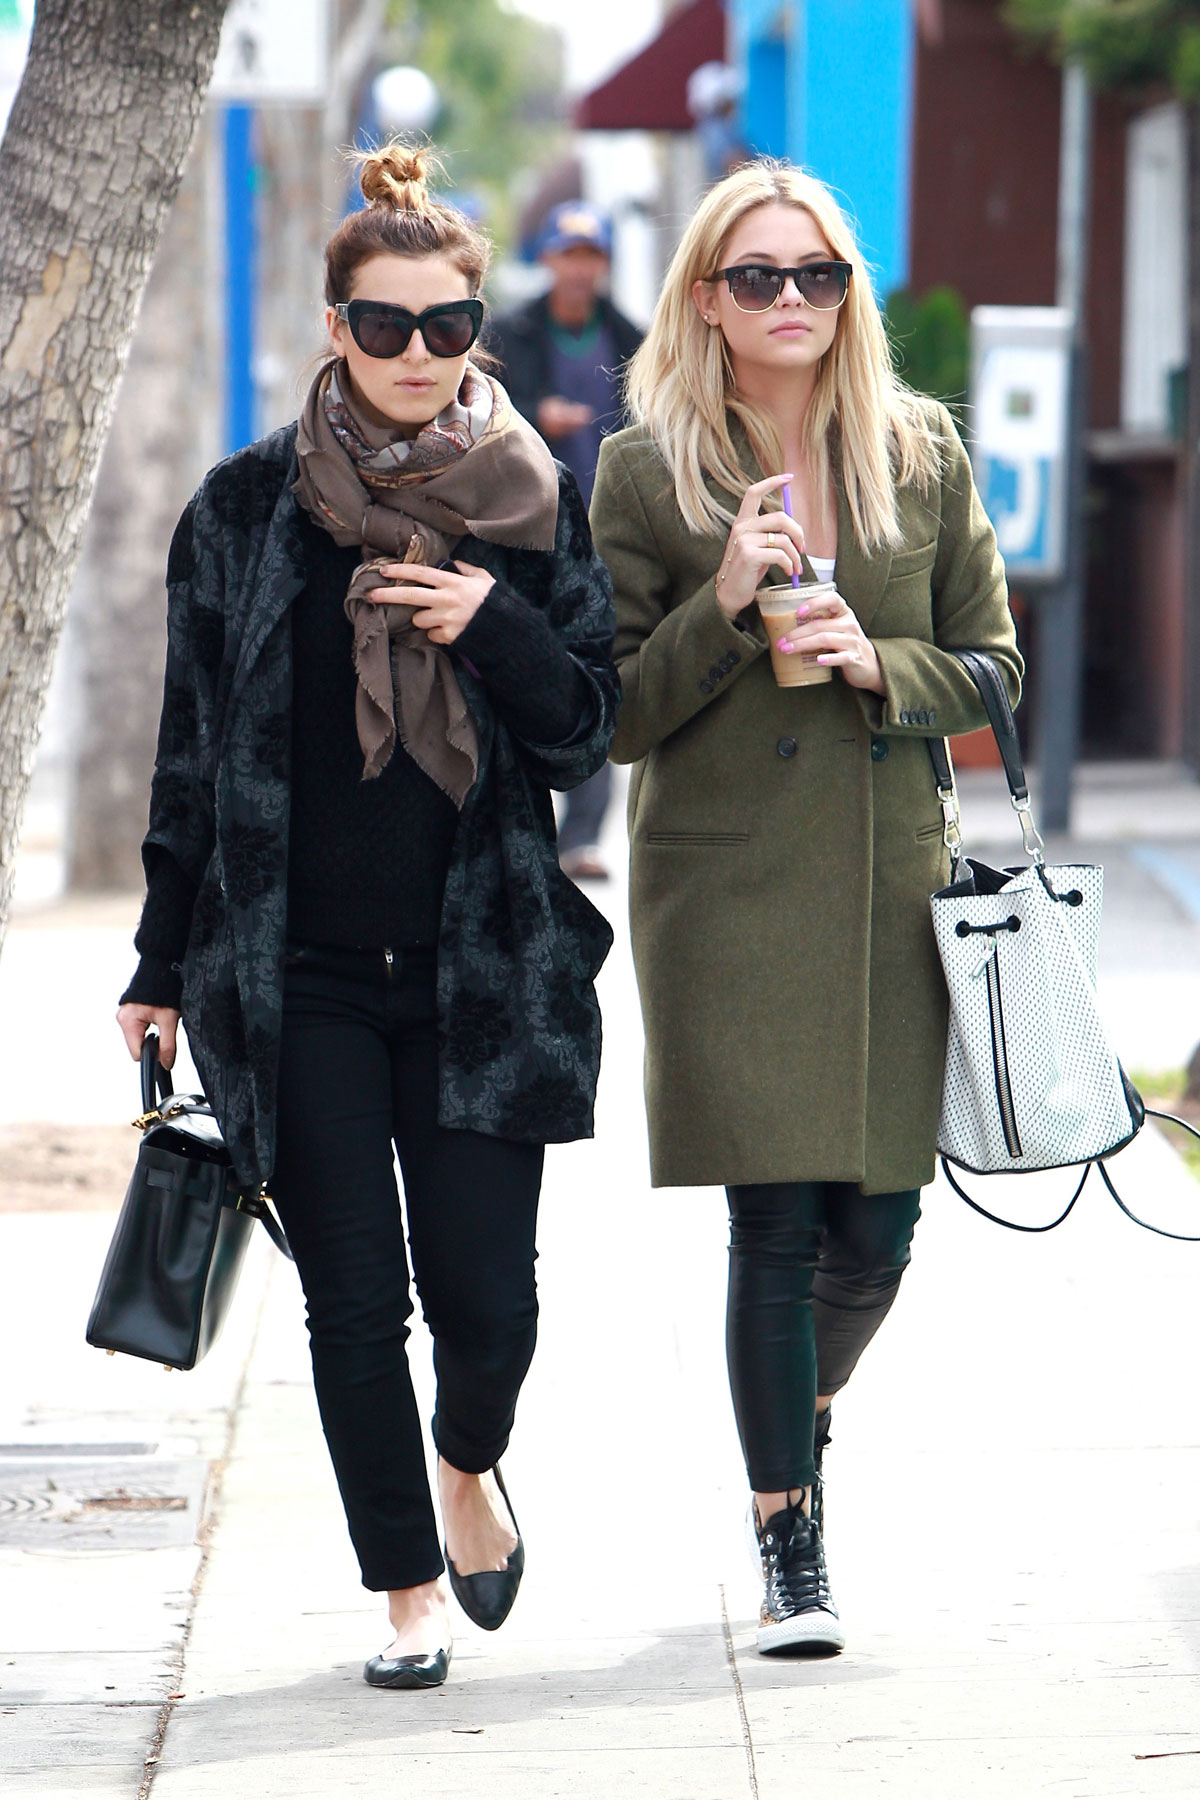 Ashley Benson grabs lunch with a friend